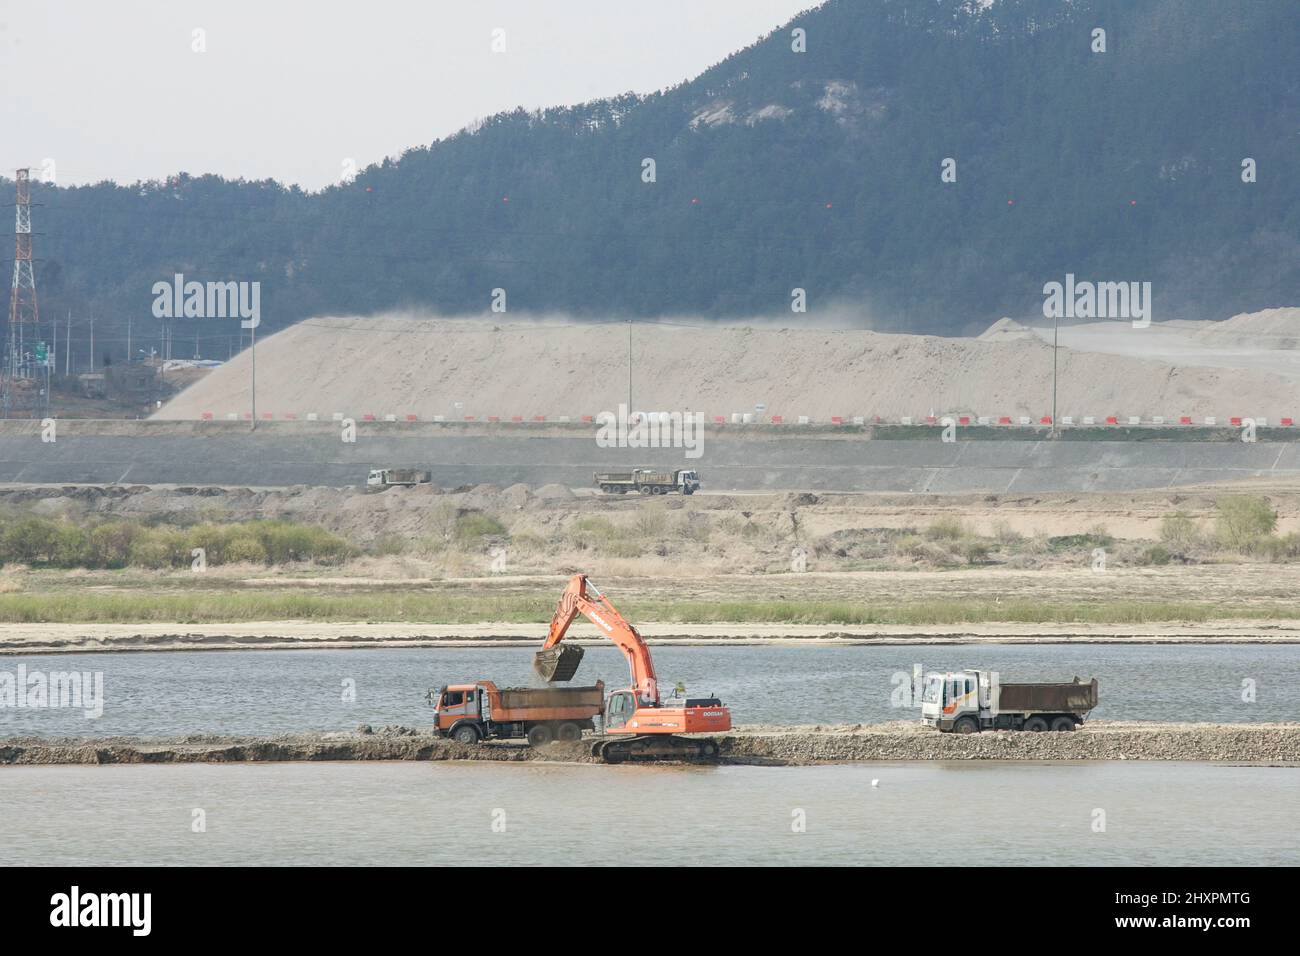 March 14, 2022-Seoul, South Korea-A Construction machines destroyed wetland in Gongju, South Korea. A Contemporary climate change includes both global warming and its impacts on Earth's weather patterns. There have been previous periods of climate change, but the current changes are distinctly more rapid and not due to natural causes. Instead, they are caused by the emission of greenhouse gases, mostly carbon dioxide (CO2) and methane. Burning fossil fuels for energy use creates most of these emissions. Agriculture, steelmaking, cement production, and forest loss are additional sources. Greenh Stock Photo